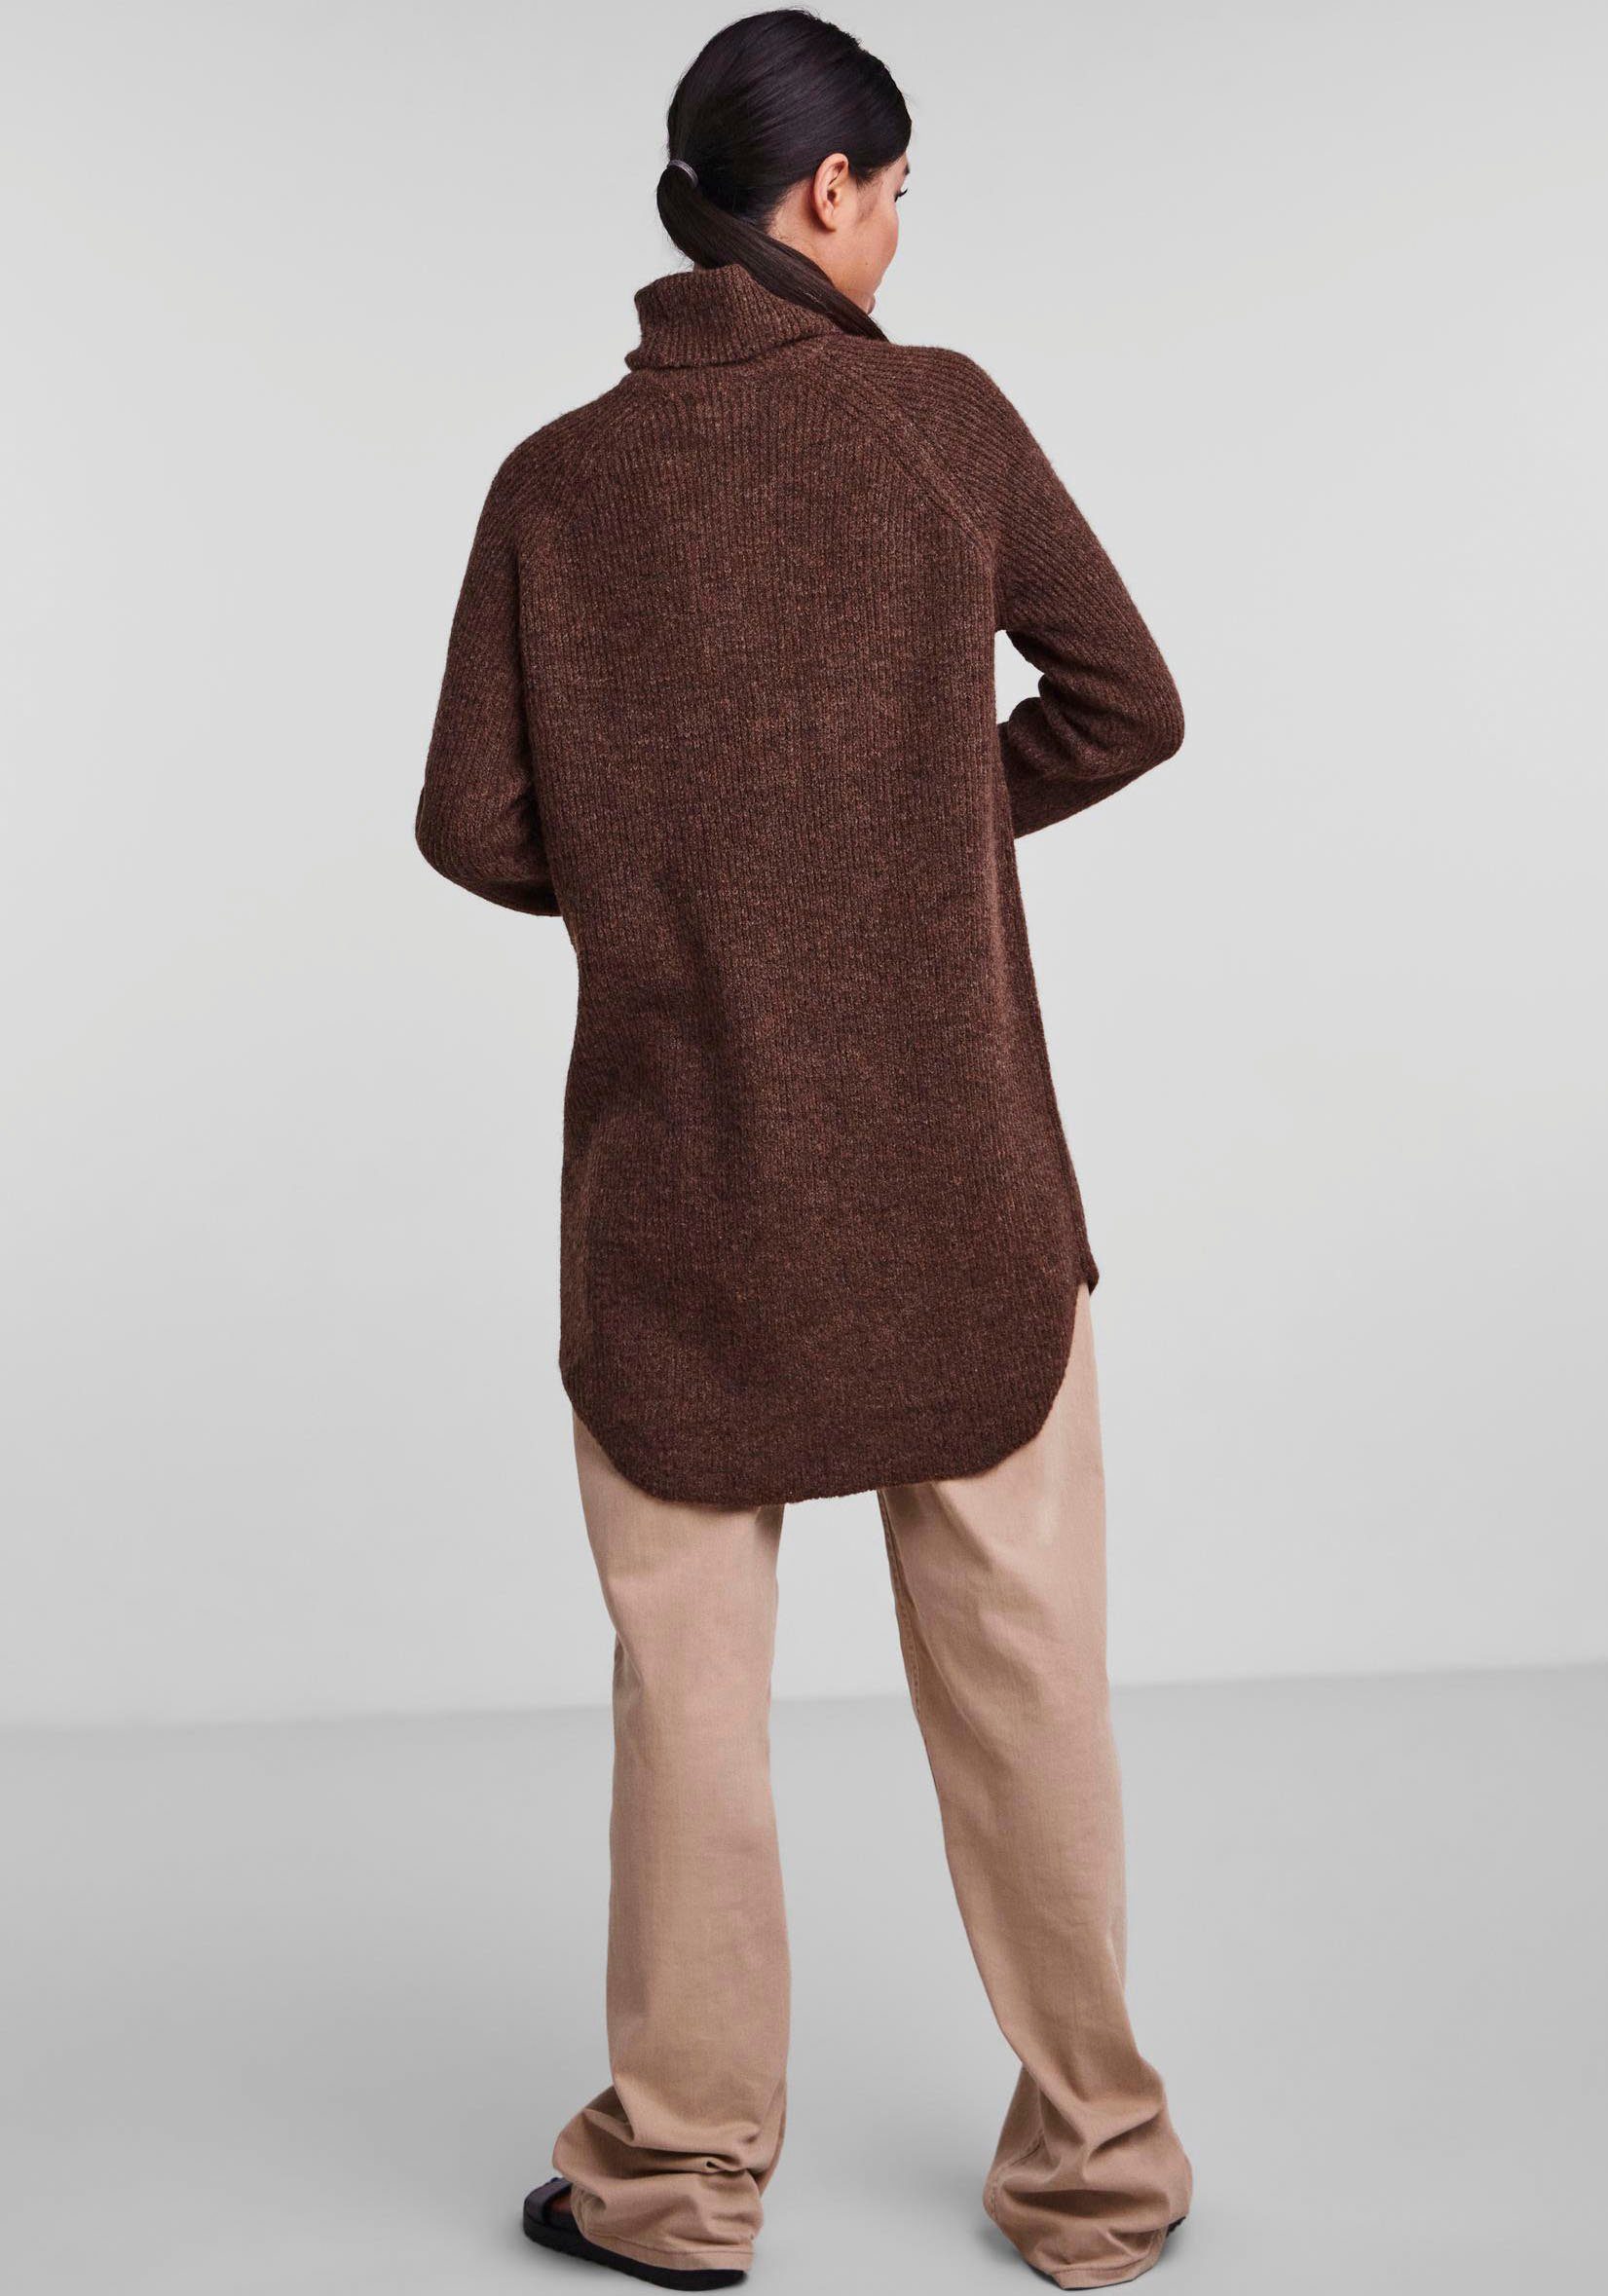 pieces Rollkragenpullover BC LS Coffee NOOS PCELLEN LONG Chicory KNIT